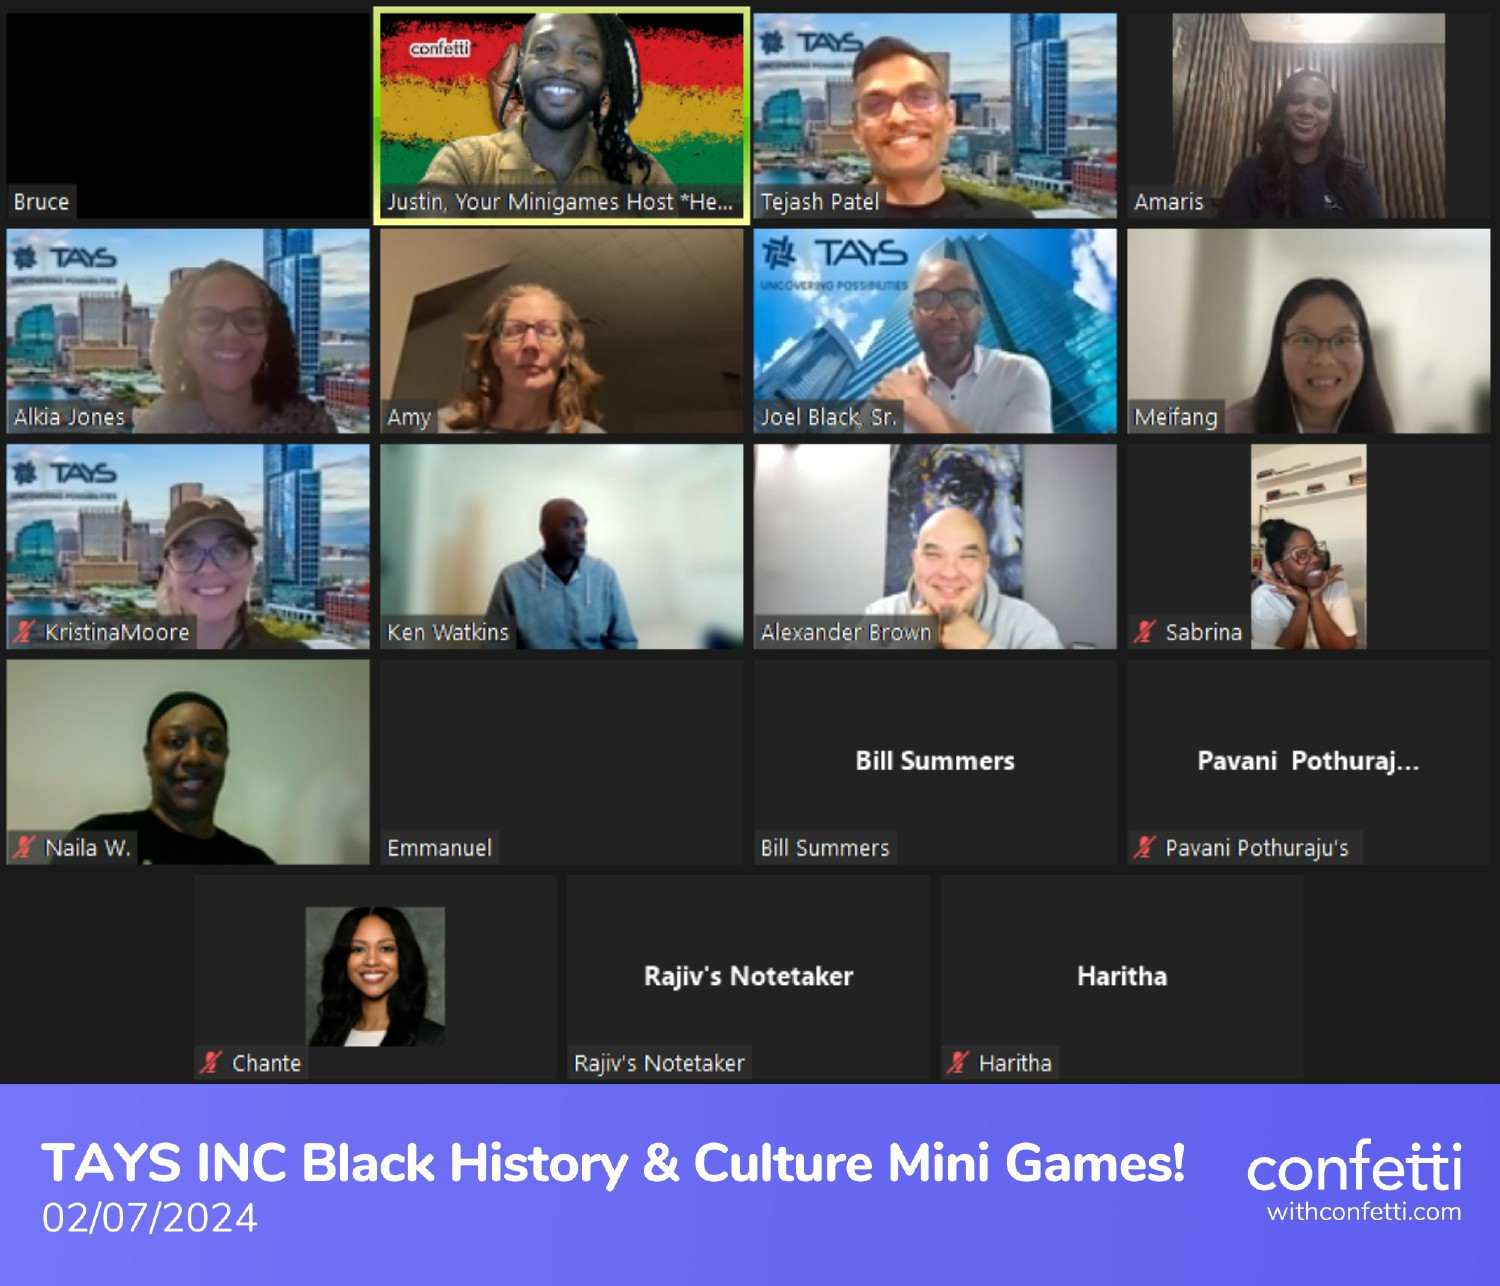 We hosted a virtual game night event focused around black history music trivia for Black History month.